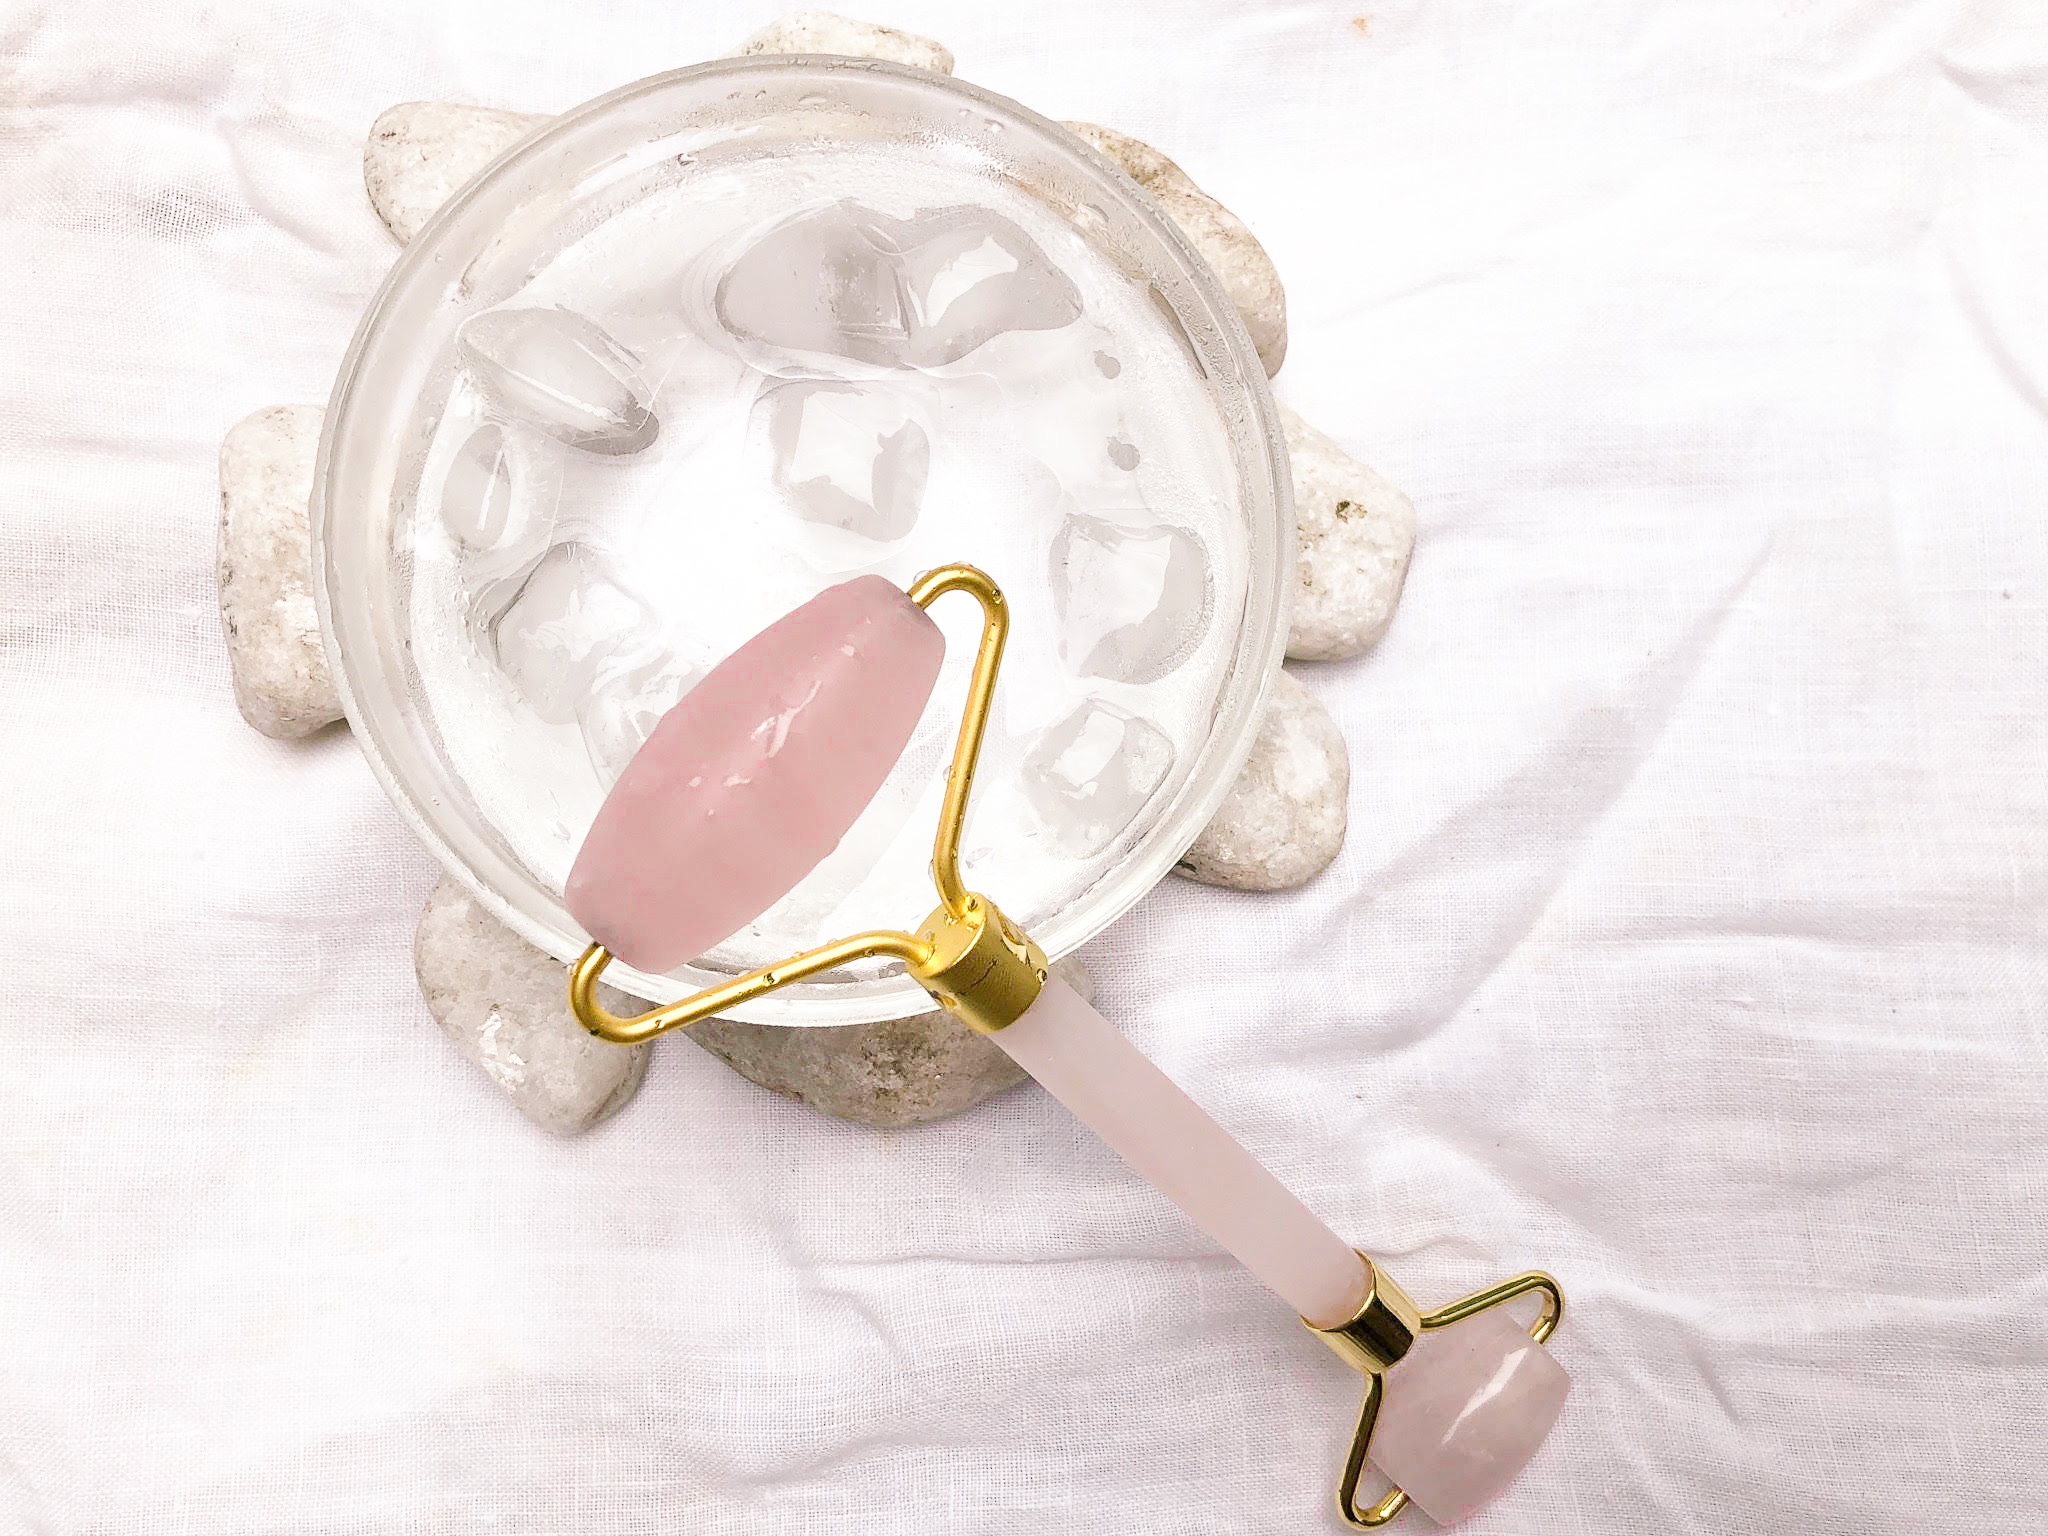 WHY SHOULD YOU USE A ROSE QUARTZ FACE ROLLER